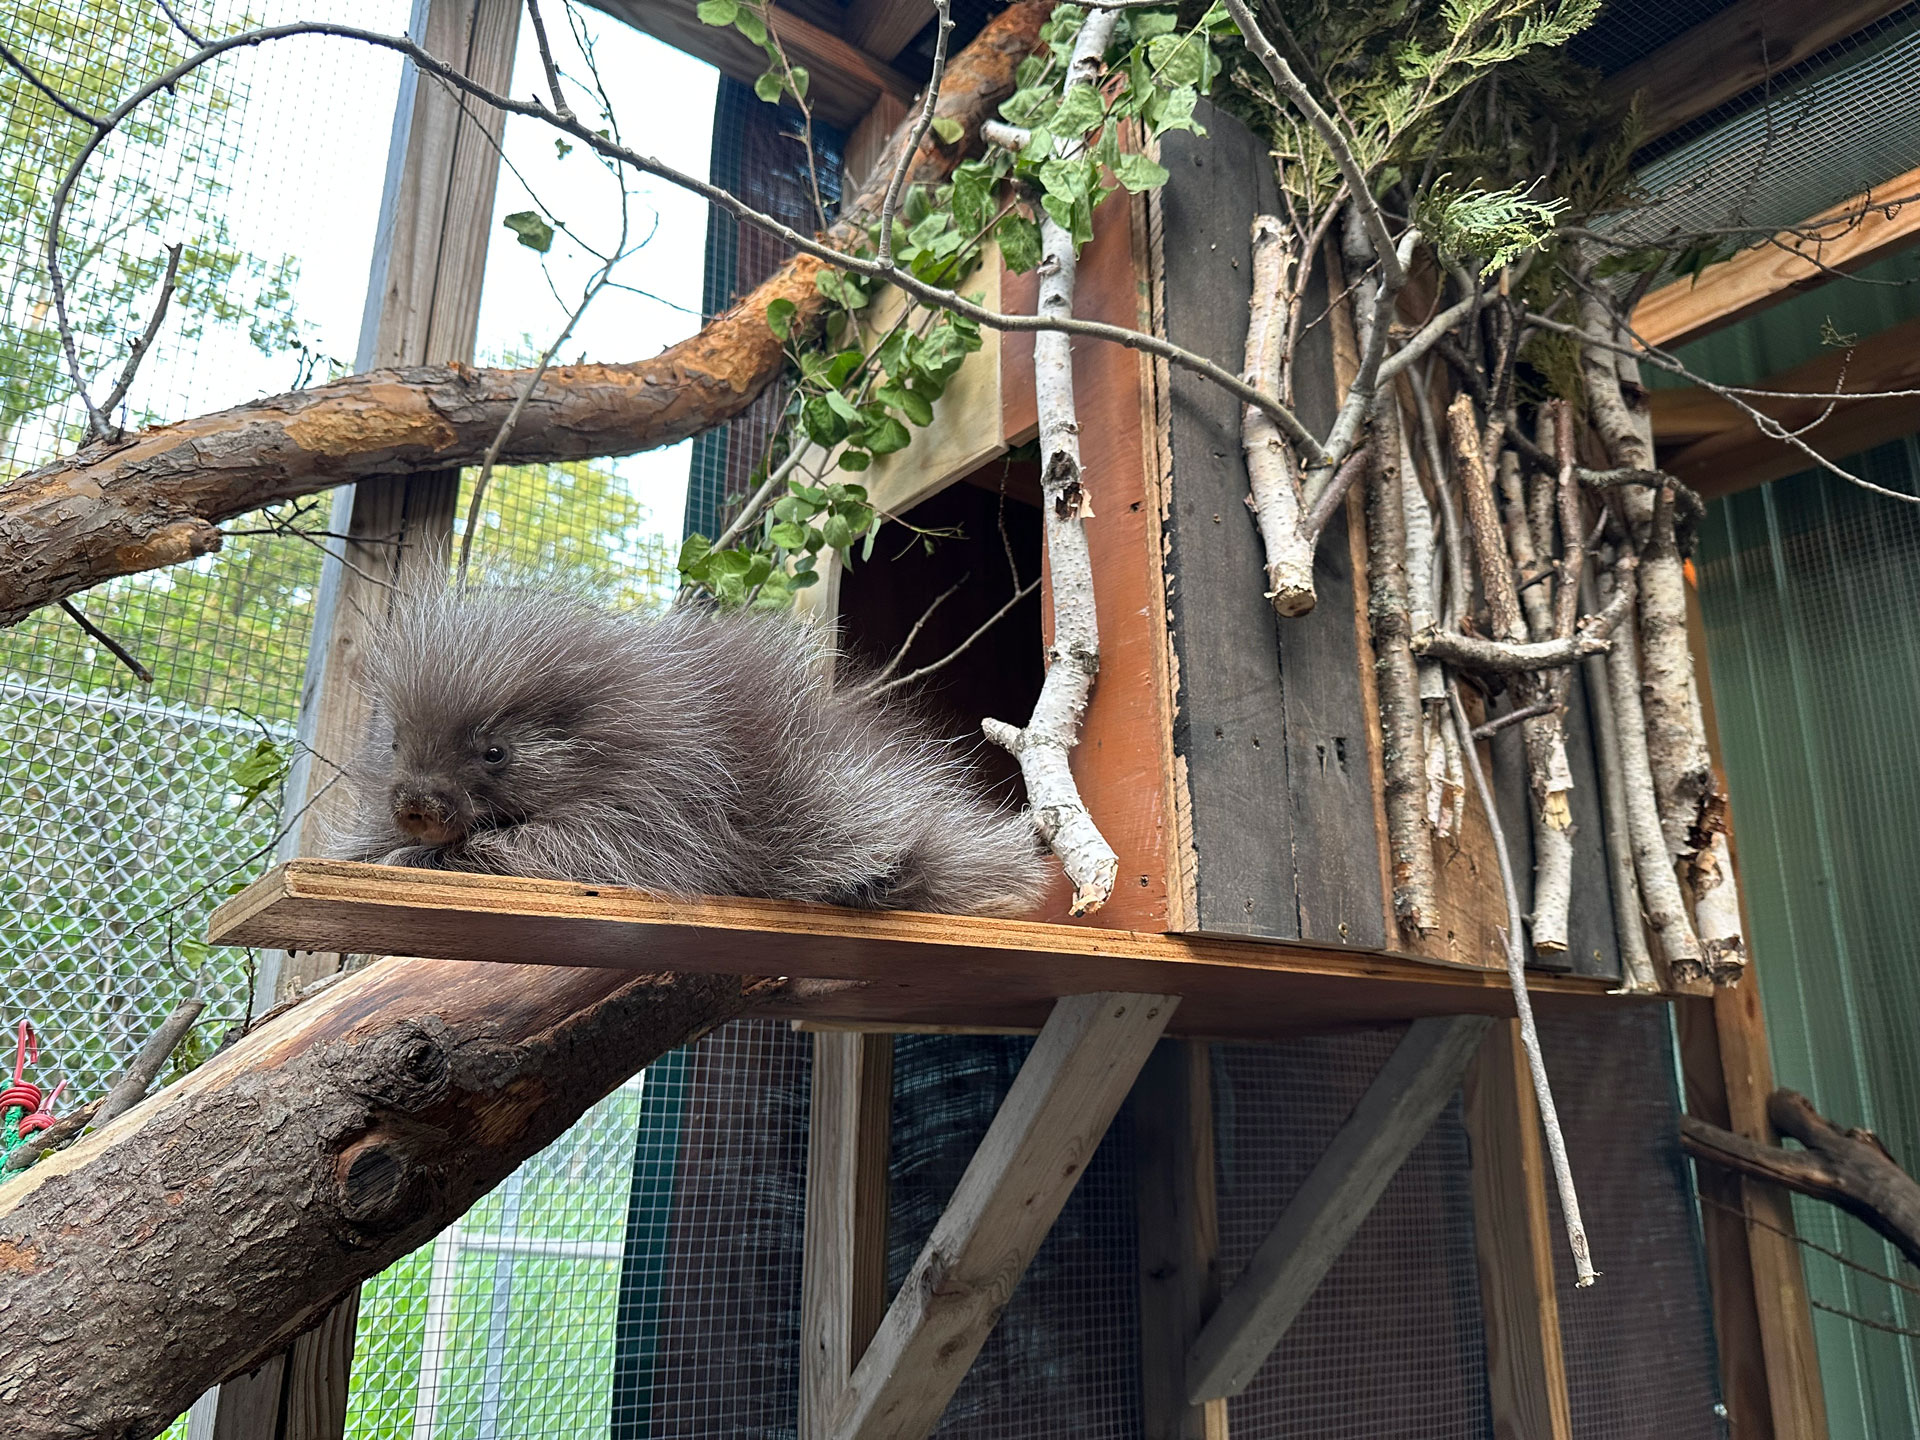 A porcupine rests on a wooden platform outside a rustic, tree-branch filled enclosure. The setting, part of a wildlife preservation area, includes natural branches and leaves, with a wire fence visible in the background.